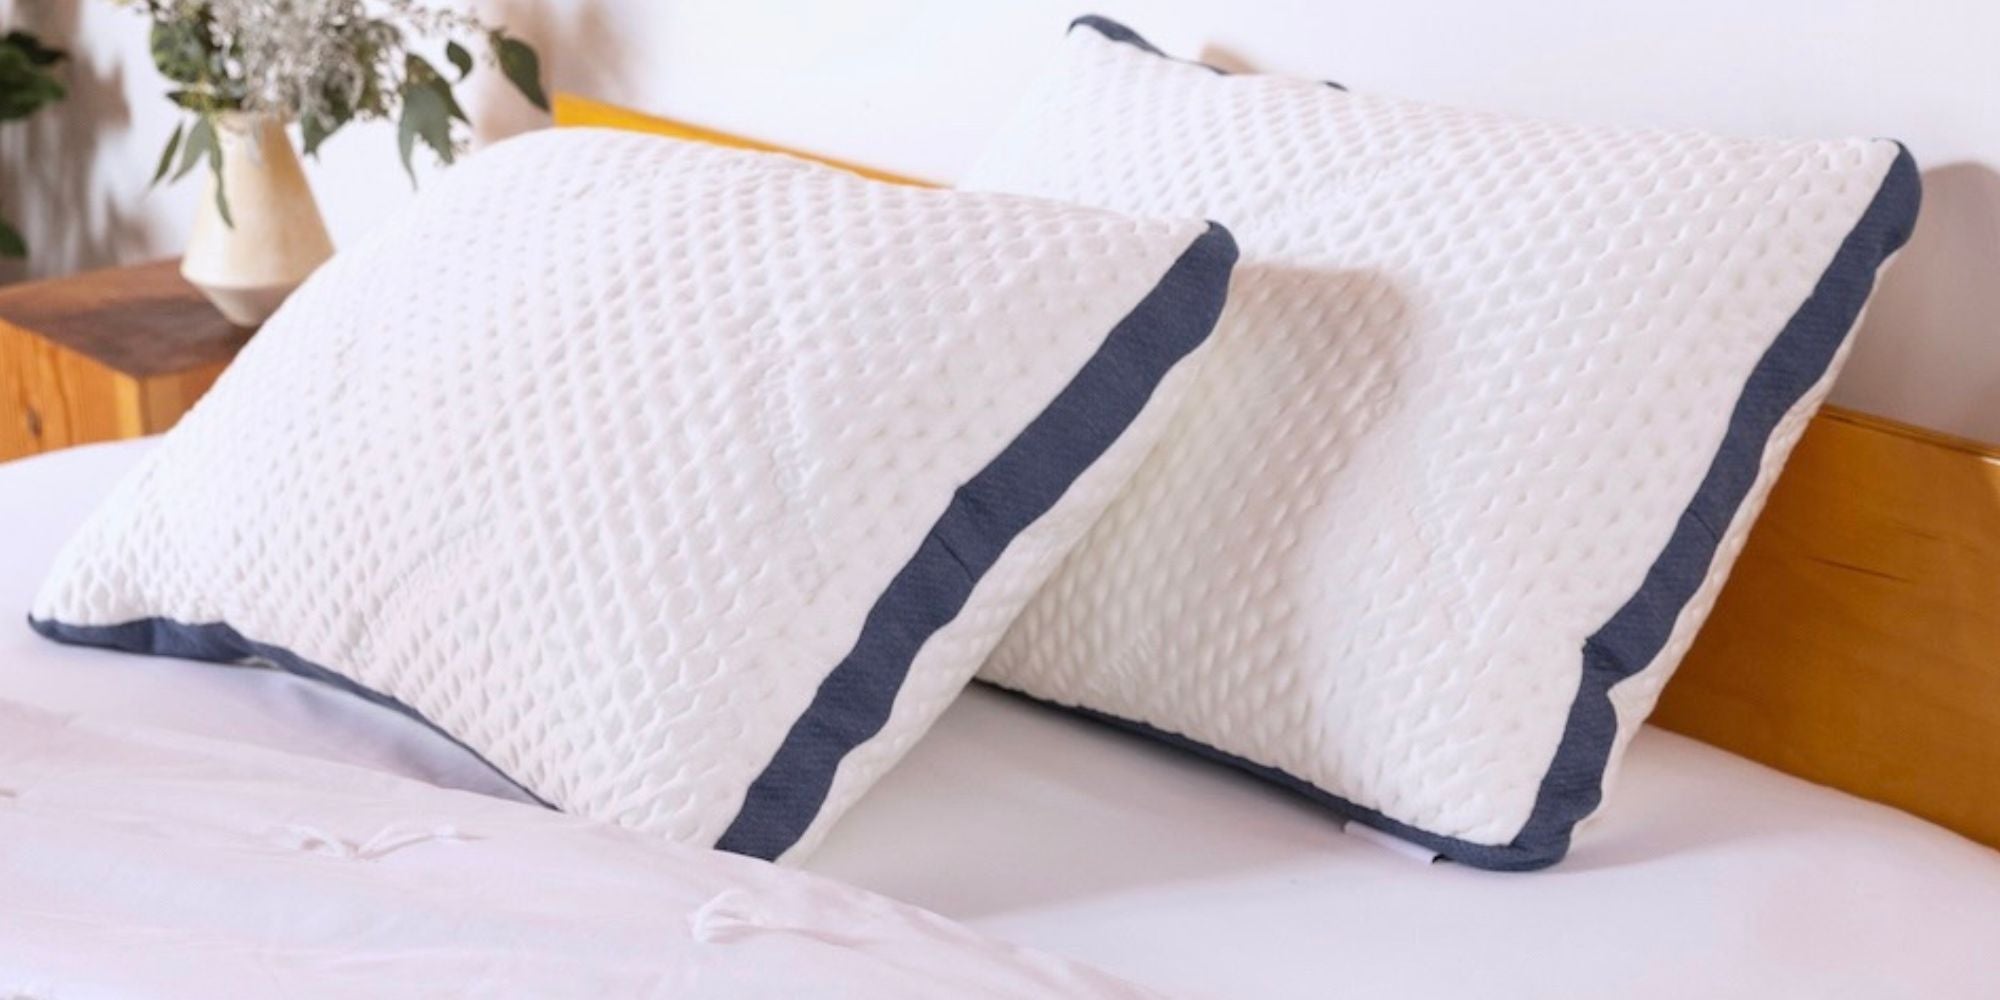 sleep cooler in these american made pillows designed for side, back and front sleepers